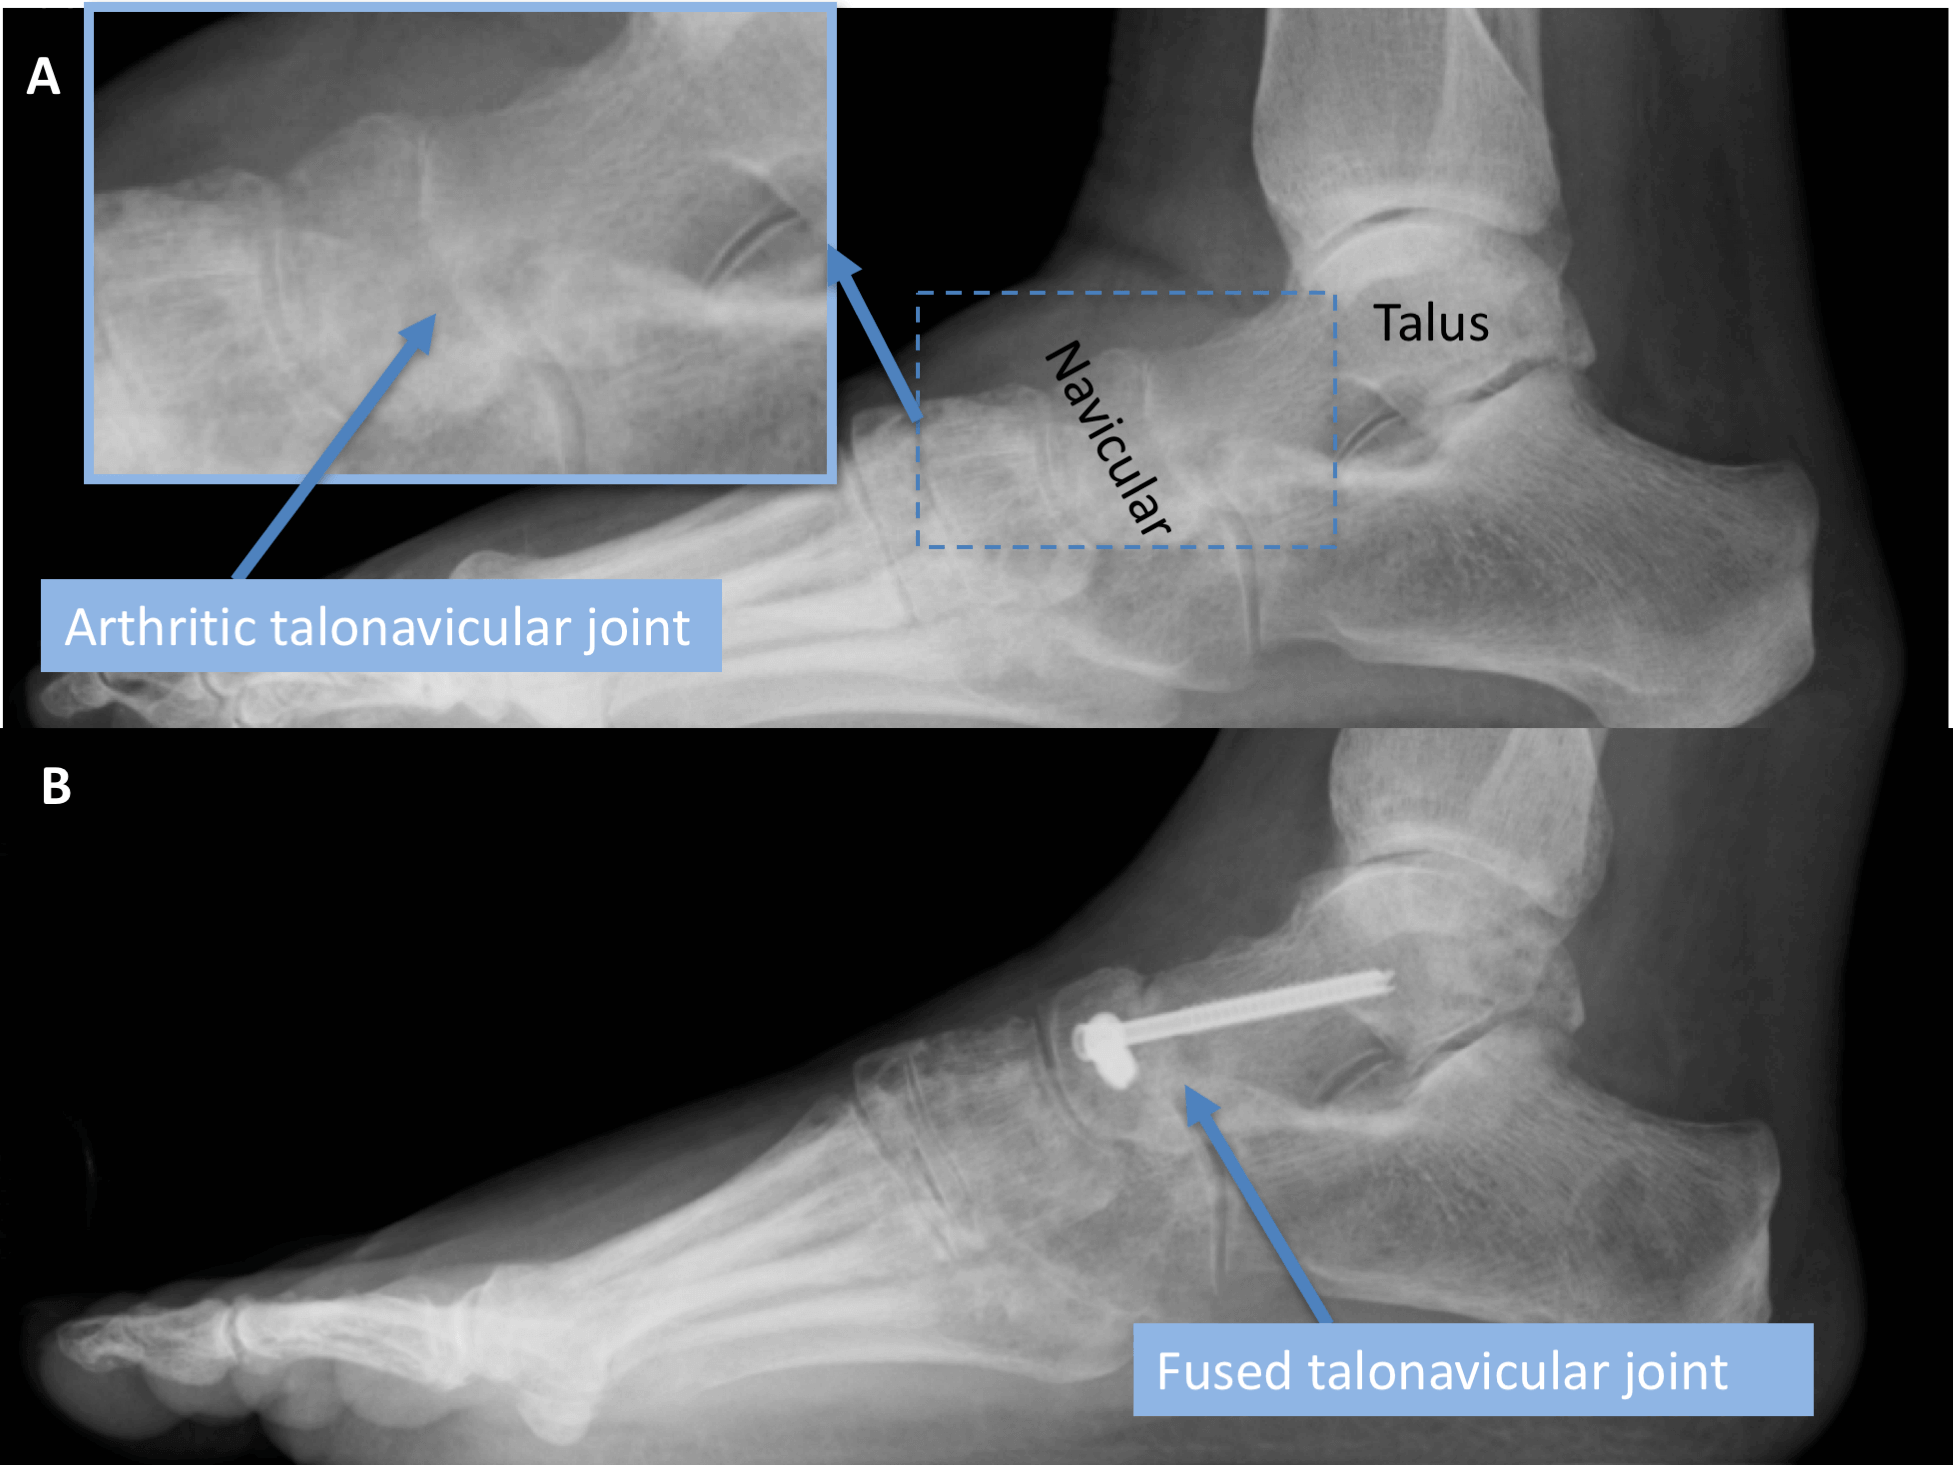 A - Lateral radiograph of a foot pre operatively demonstrating severe bone on bone talonavicular arthritis B - Post operative radiograph at 6 weeks with successful fusion at the talonavicular joint